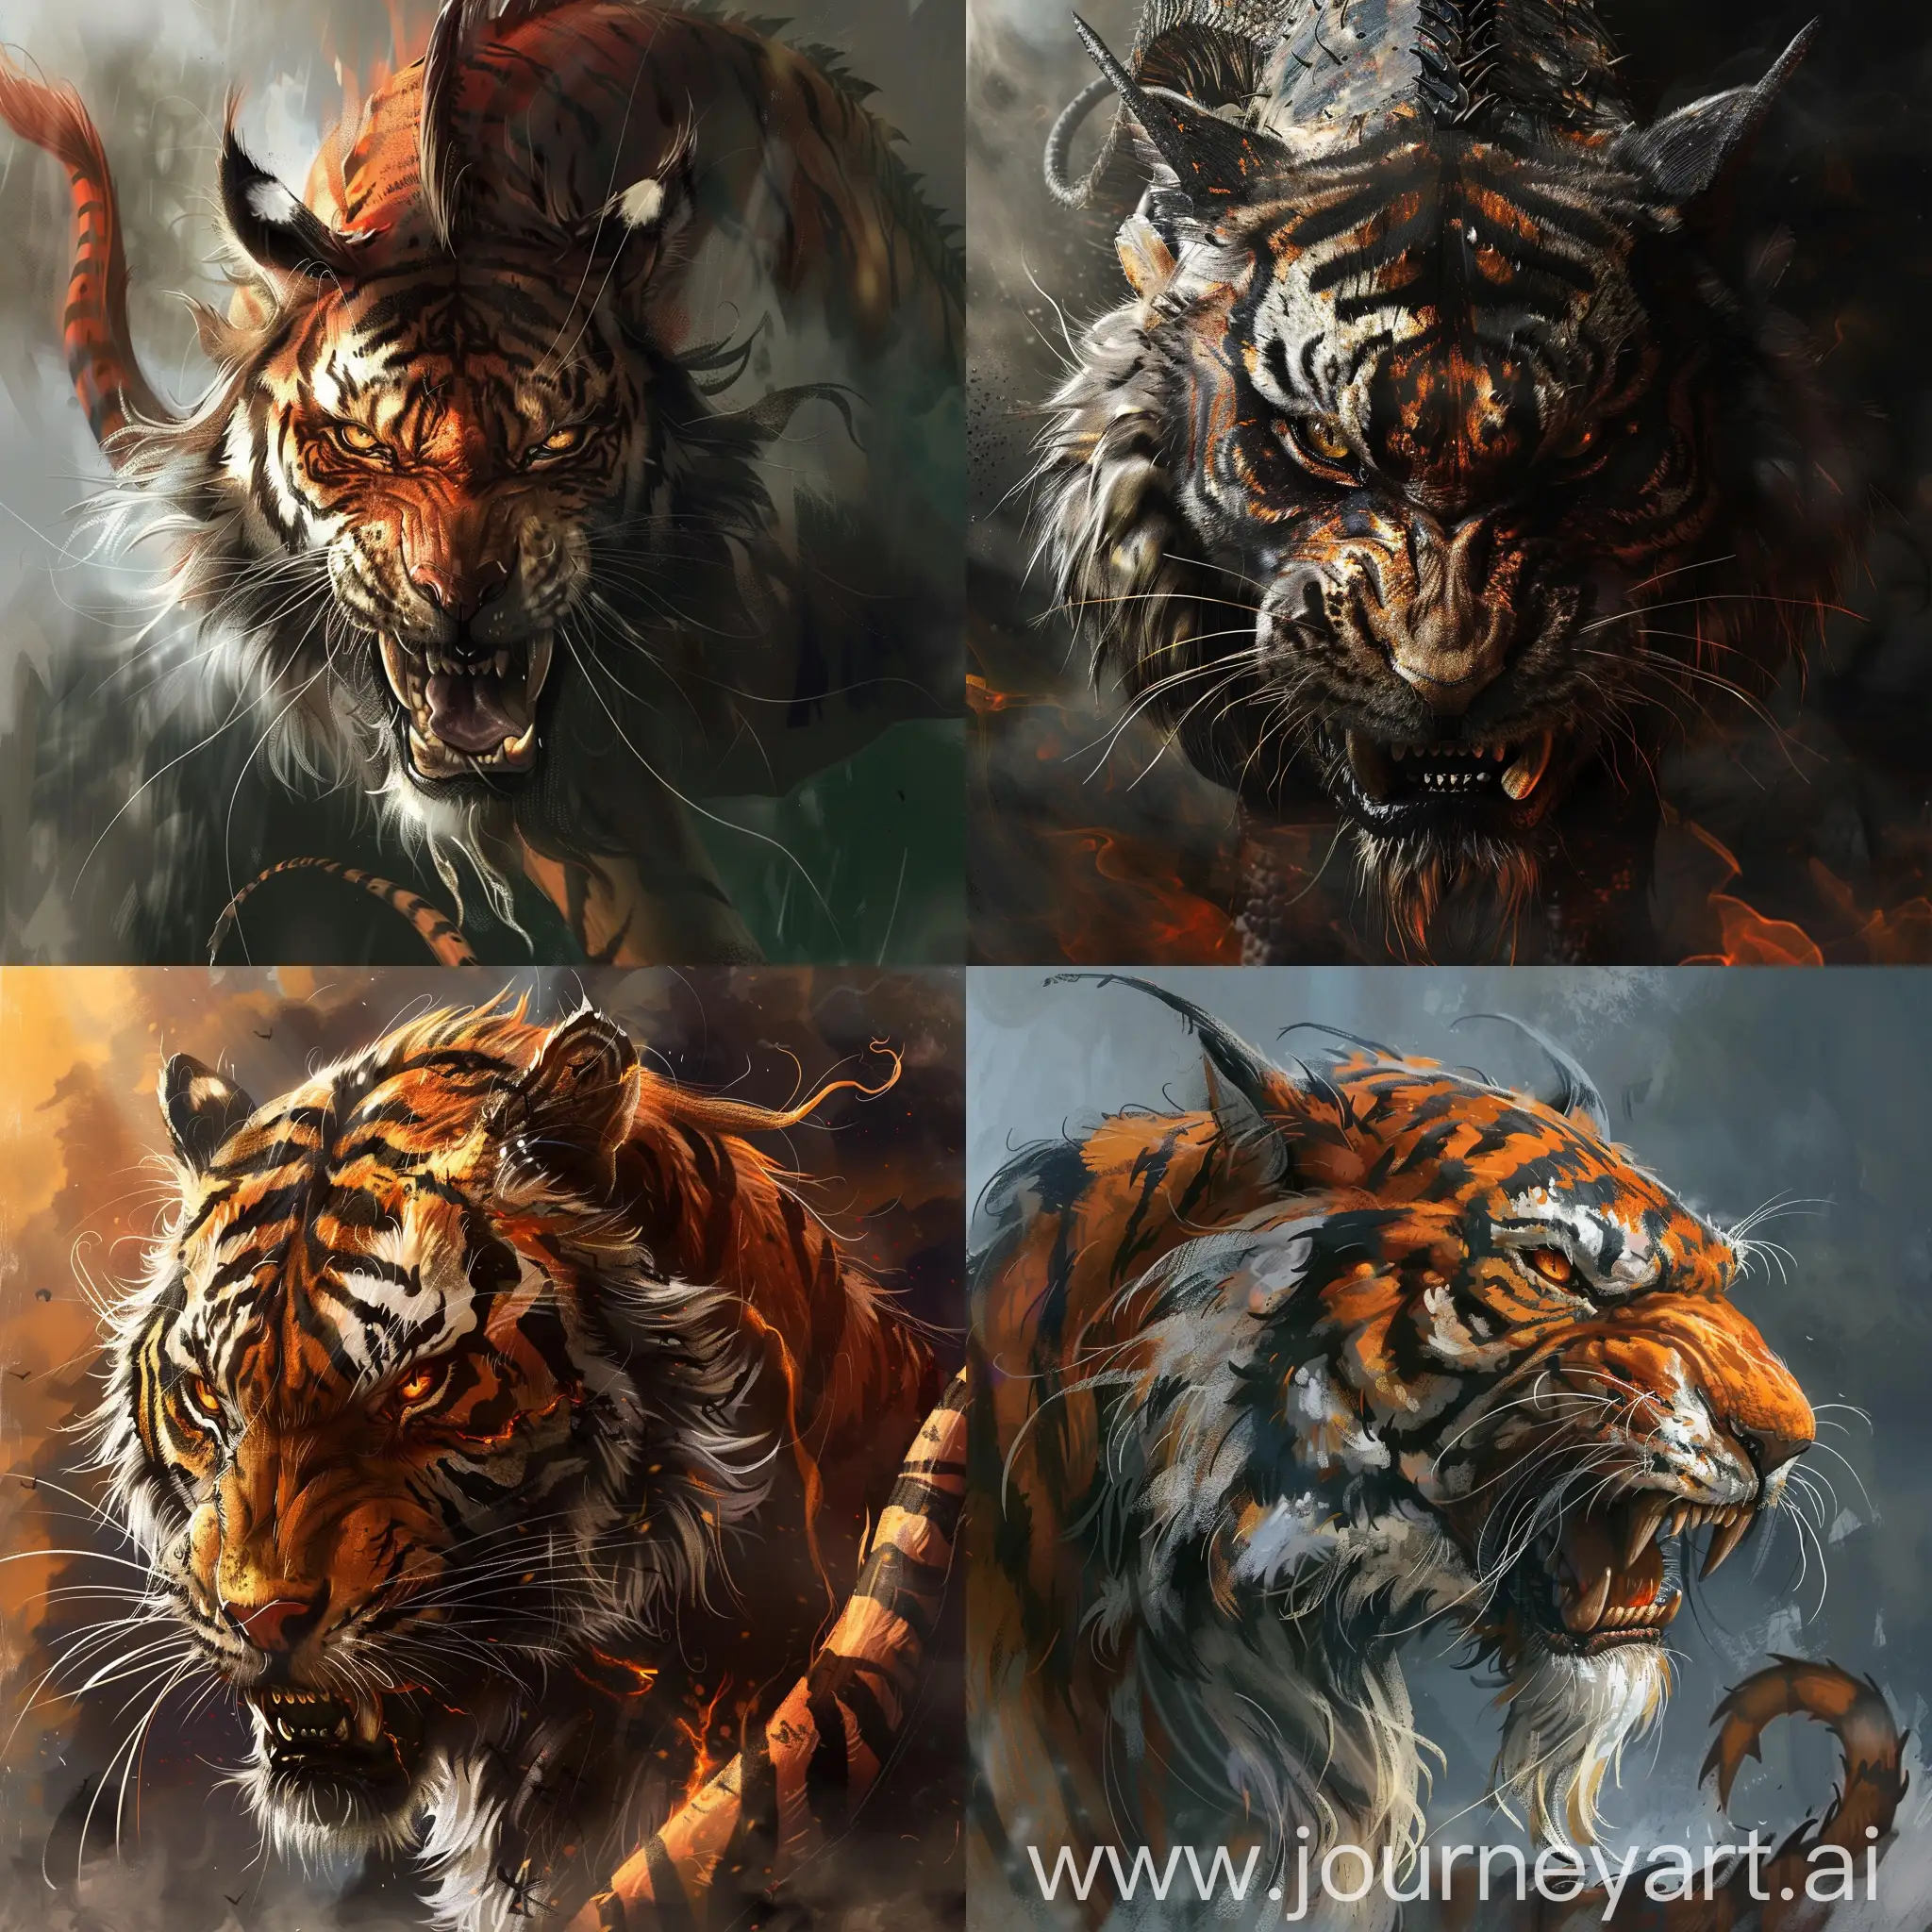 Sinister-Tiger-and-Dragon-Confrontation